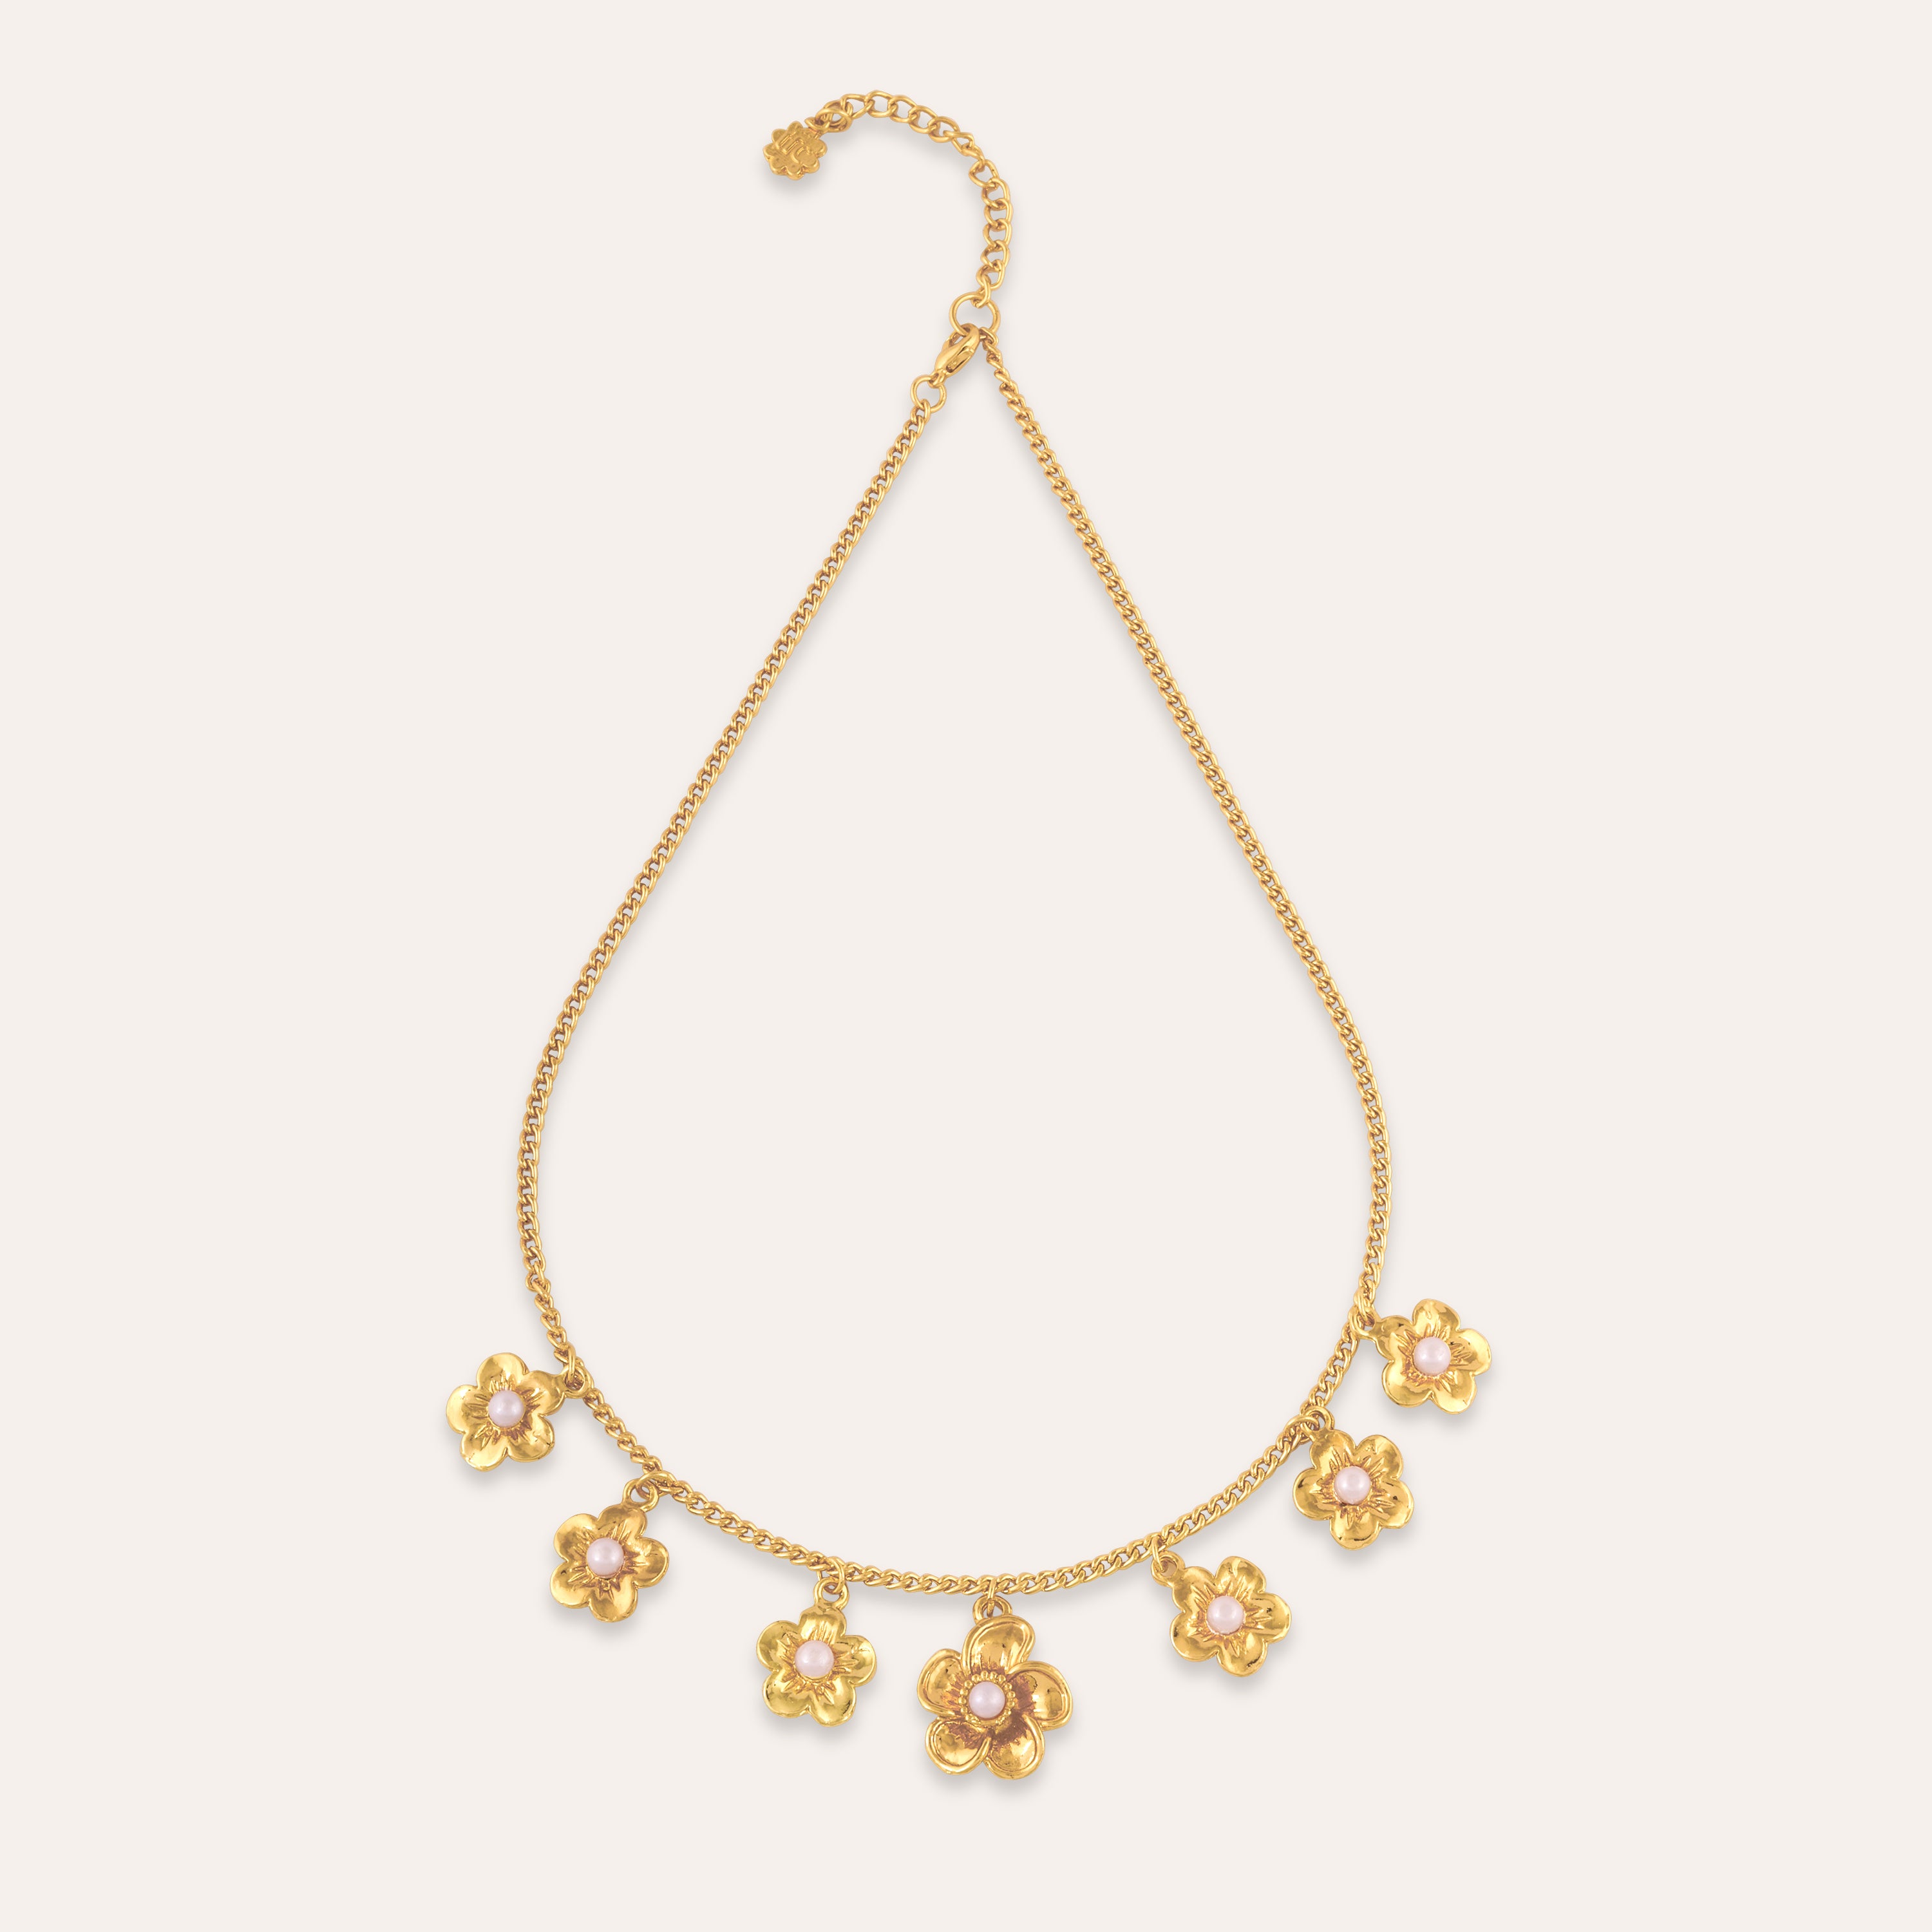 TFC Flower Pearls Charms Gold Plated Necklace-Enhance your elegance with our collection of gold-plated necklaces for women. Choose from stunning pendant necklaces, chic choker necklaces, and trendy layered necklaces. Our sleek and dainty designs are both affordable and anti-tarnish, ensuring lasting beauty. Enjoy the cheapest fashion jewellery, lightweight and stylish- only at The Fun Company.